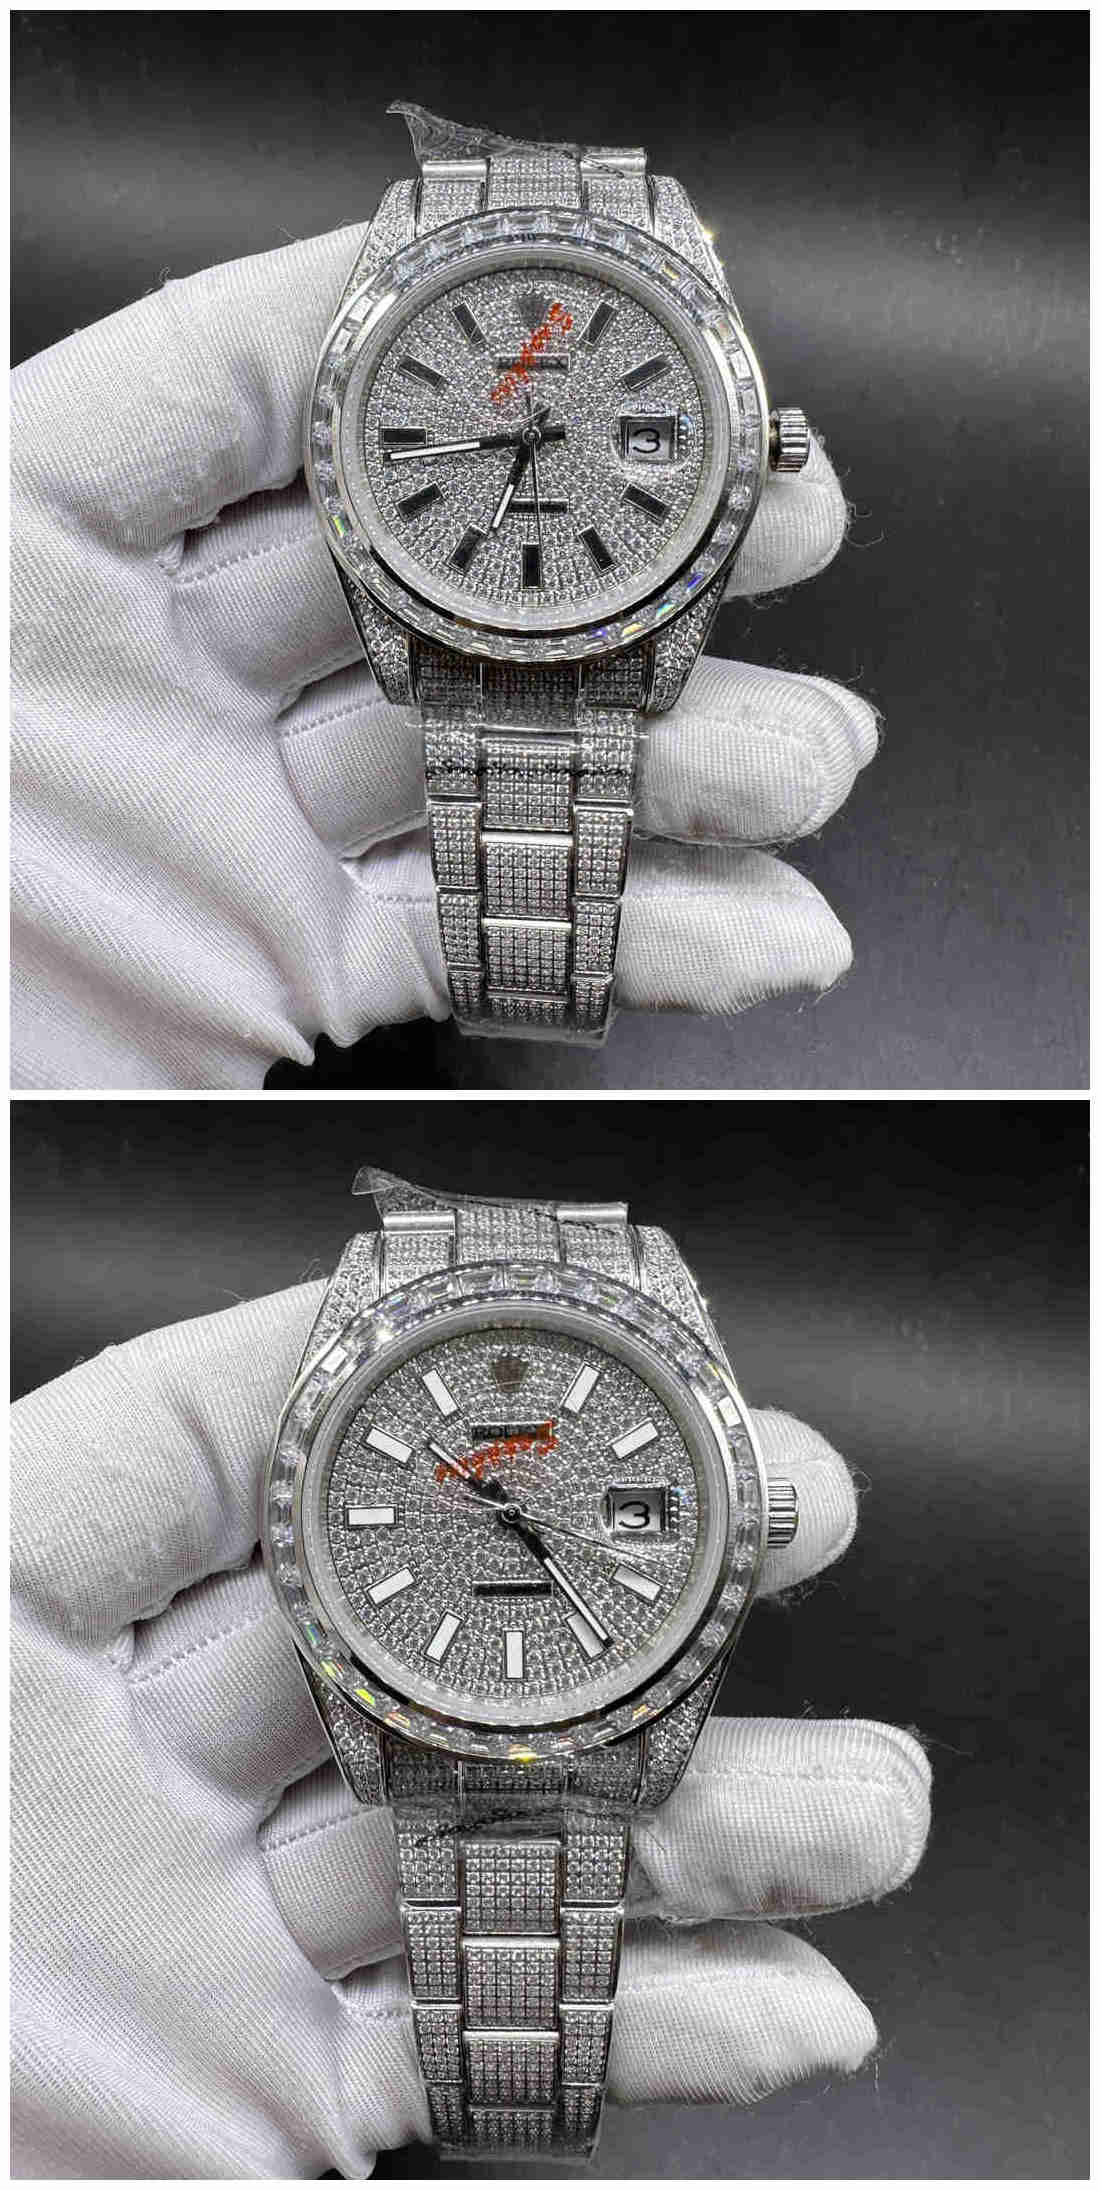 Rolex Datejust AAA 2813 automatic Iced out silver case 41mm baguette bezel diamonds dials oyster bracelet with diamonds buckles all CZ stones